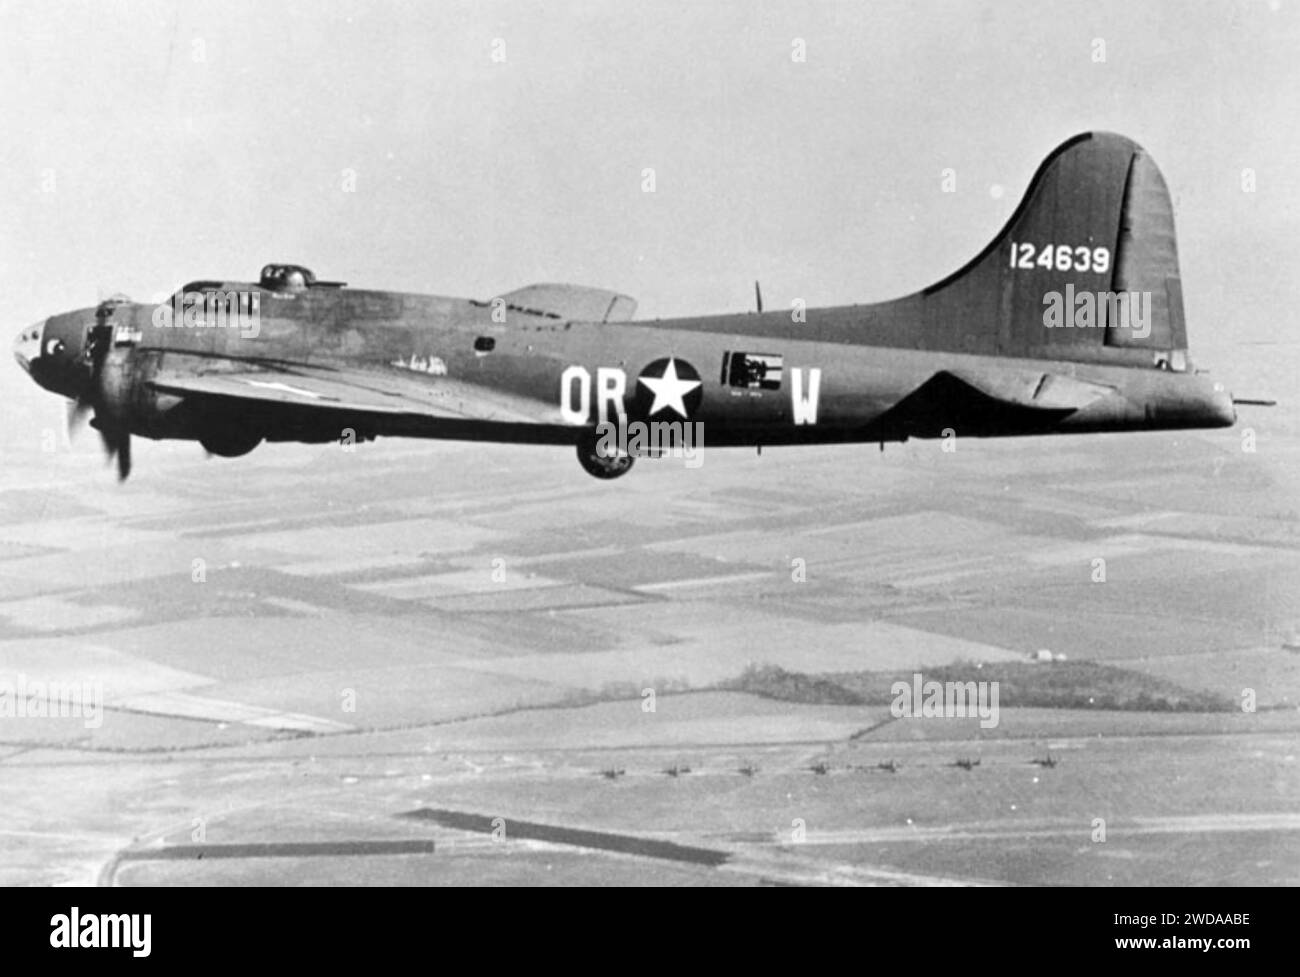 B-17F The Careful Virgin of 323rd USAF Bomb Squadron completed over 30 bombing missions before being destroyed attacking a V-bomb launch site in France in  August 1944. Stock Photo